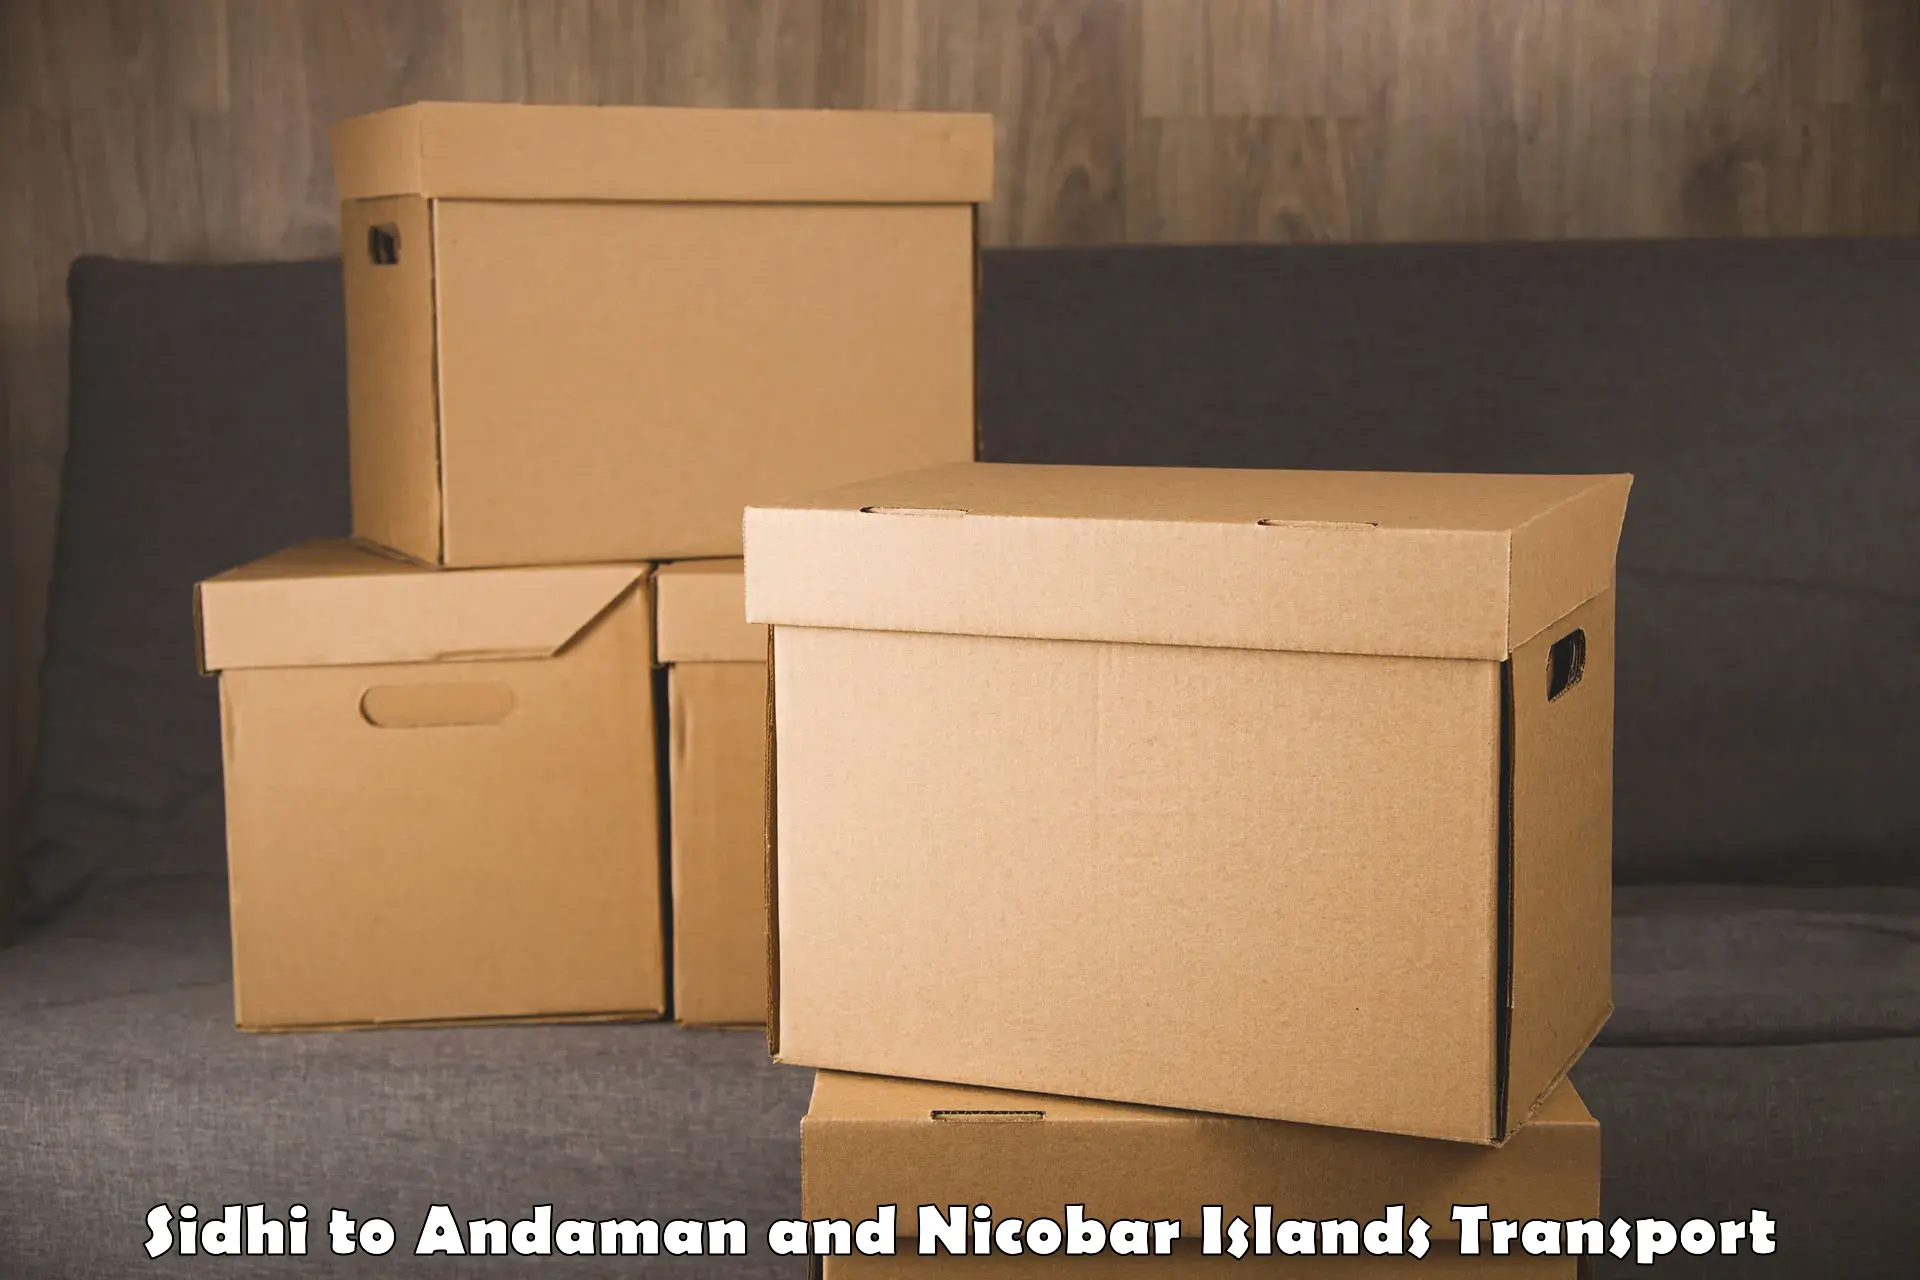 Delivery service Sidhi to Andaman and Nicobar Islands